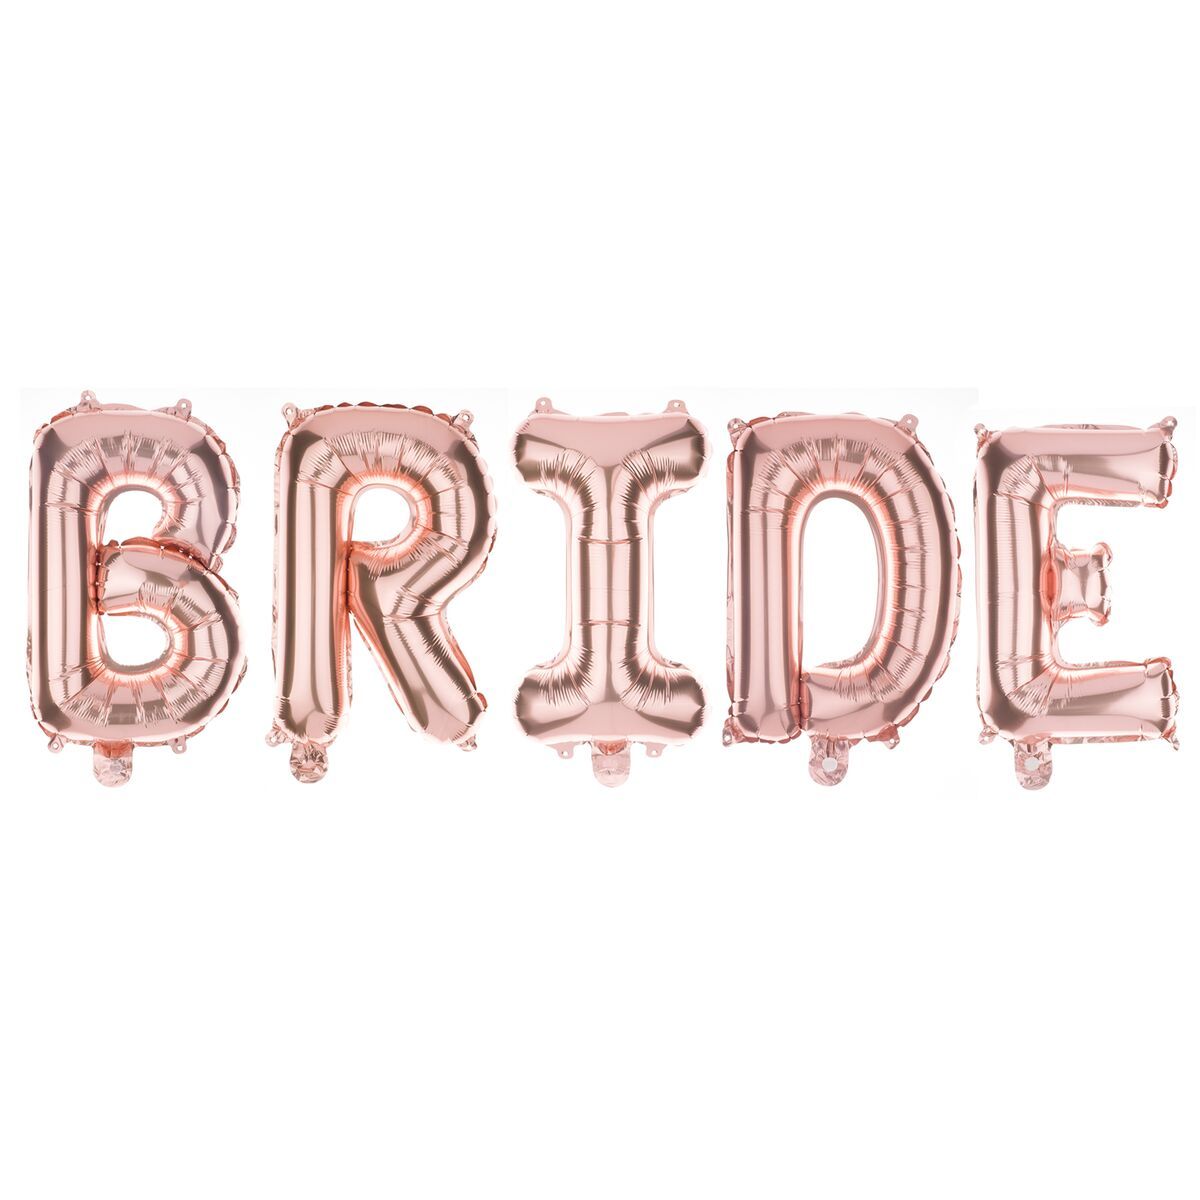 BRIDE Non-Floating Letter Balloons - 13 Inch Rose Gold